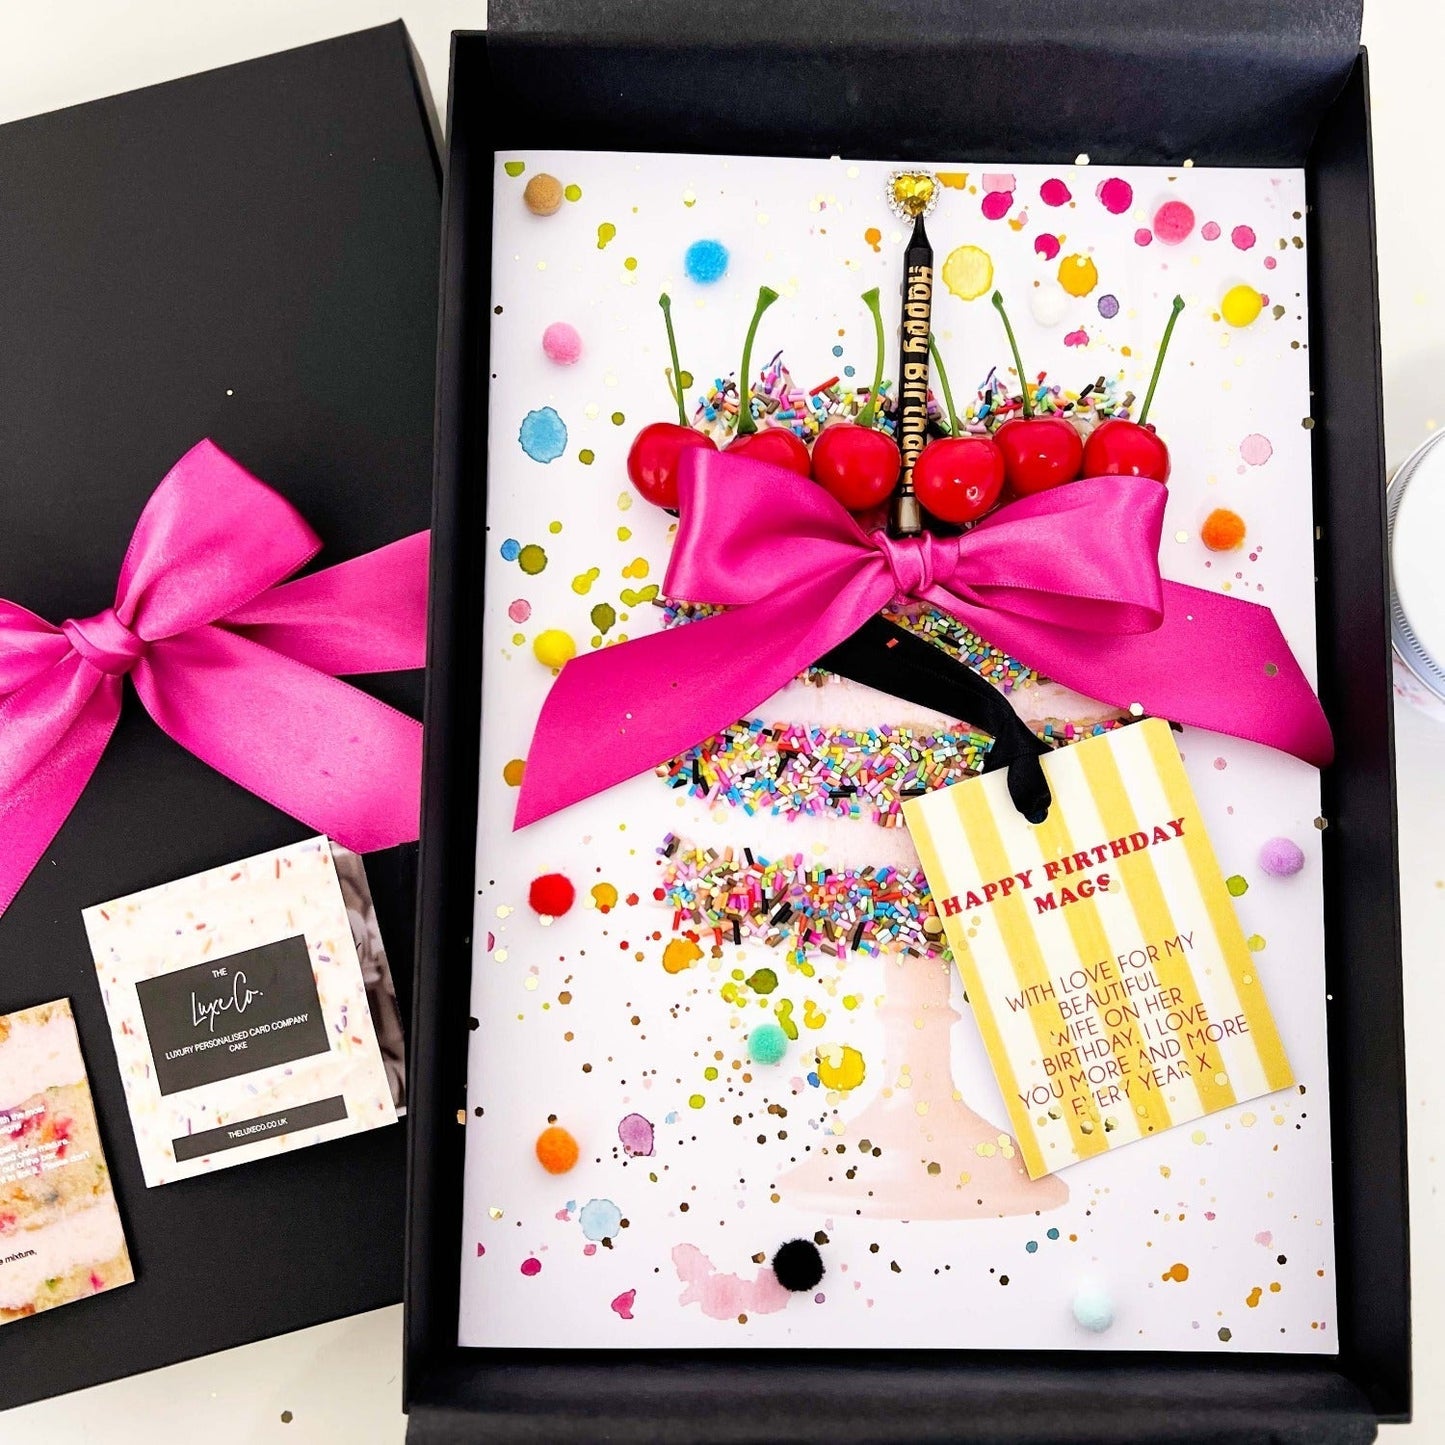 Luxury sister birthday card | Scented in birthday cake to look and smell like the real thing cards by The Luxe Co